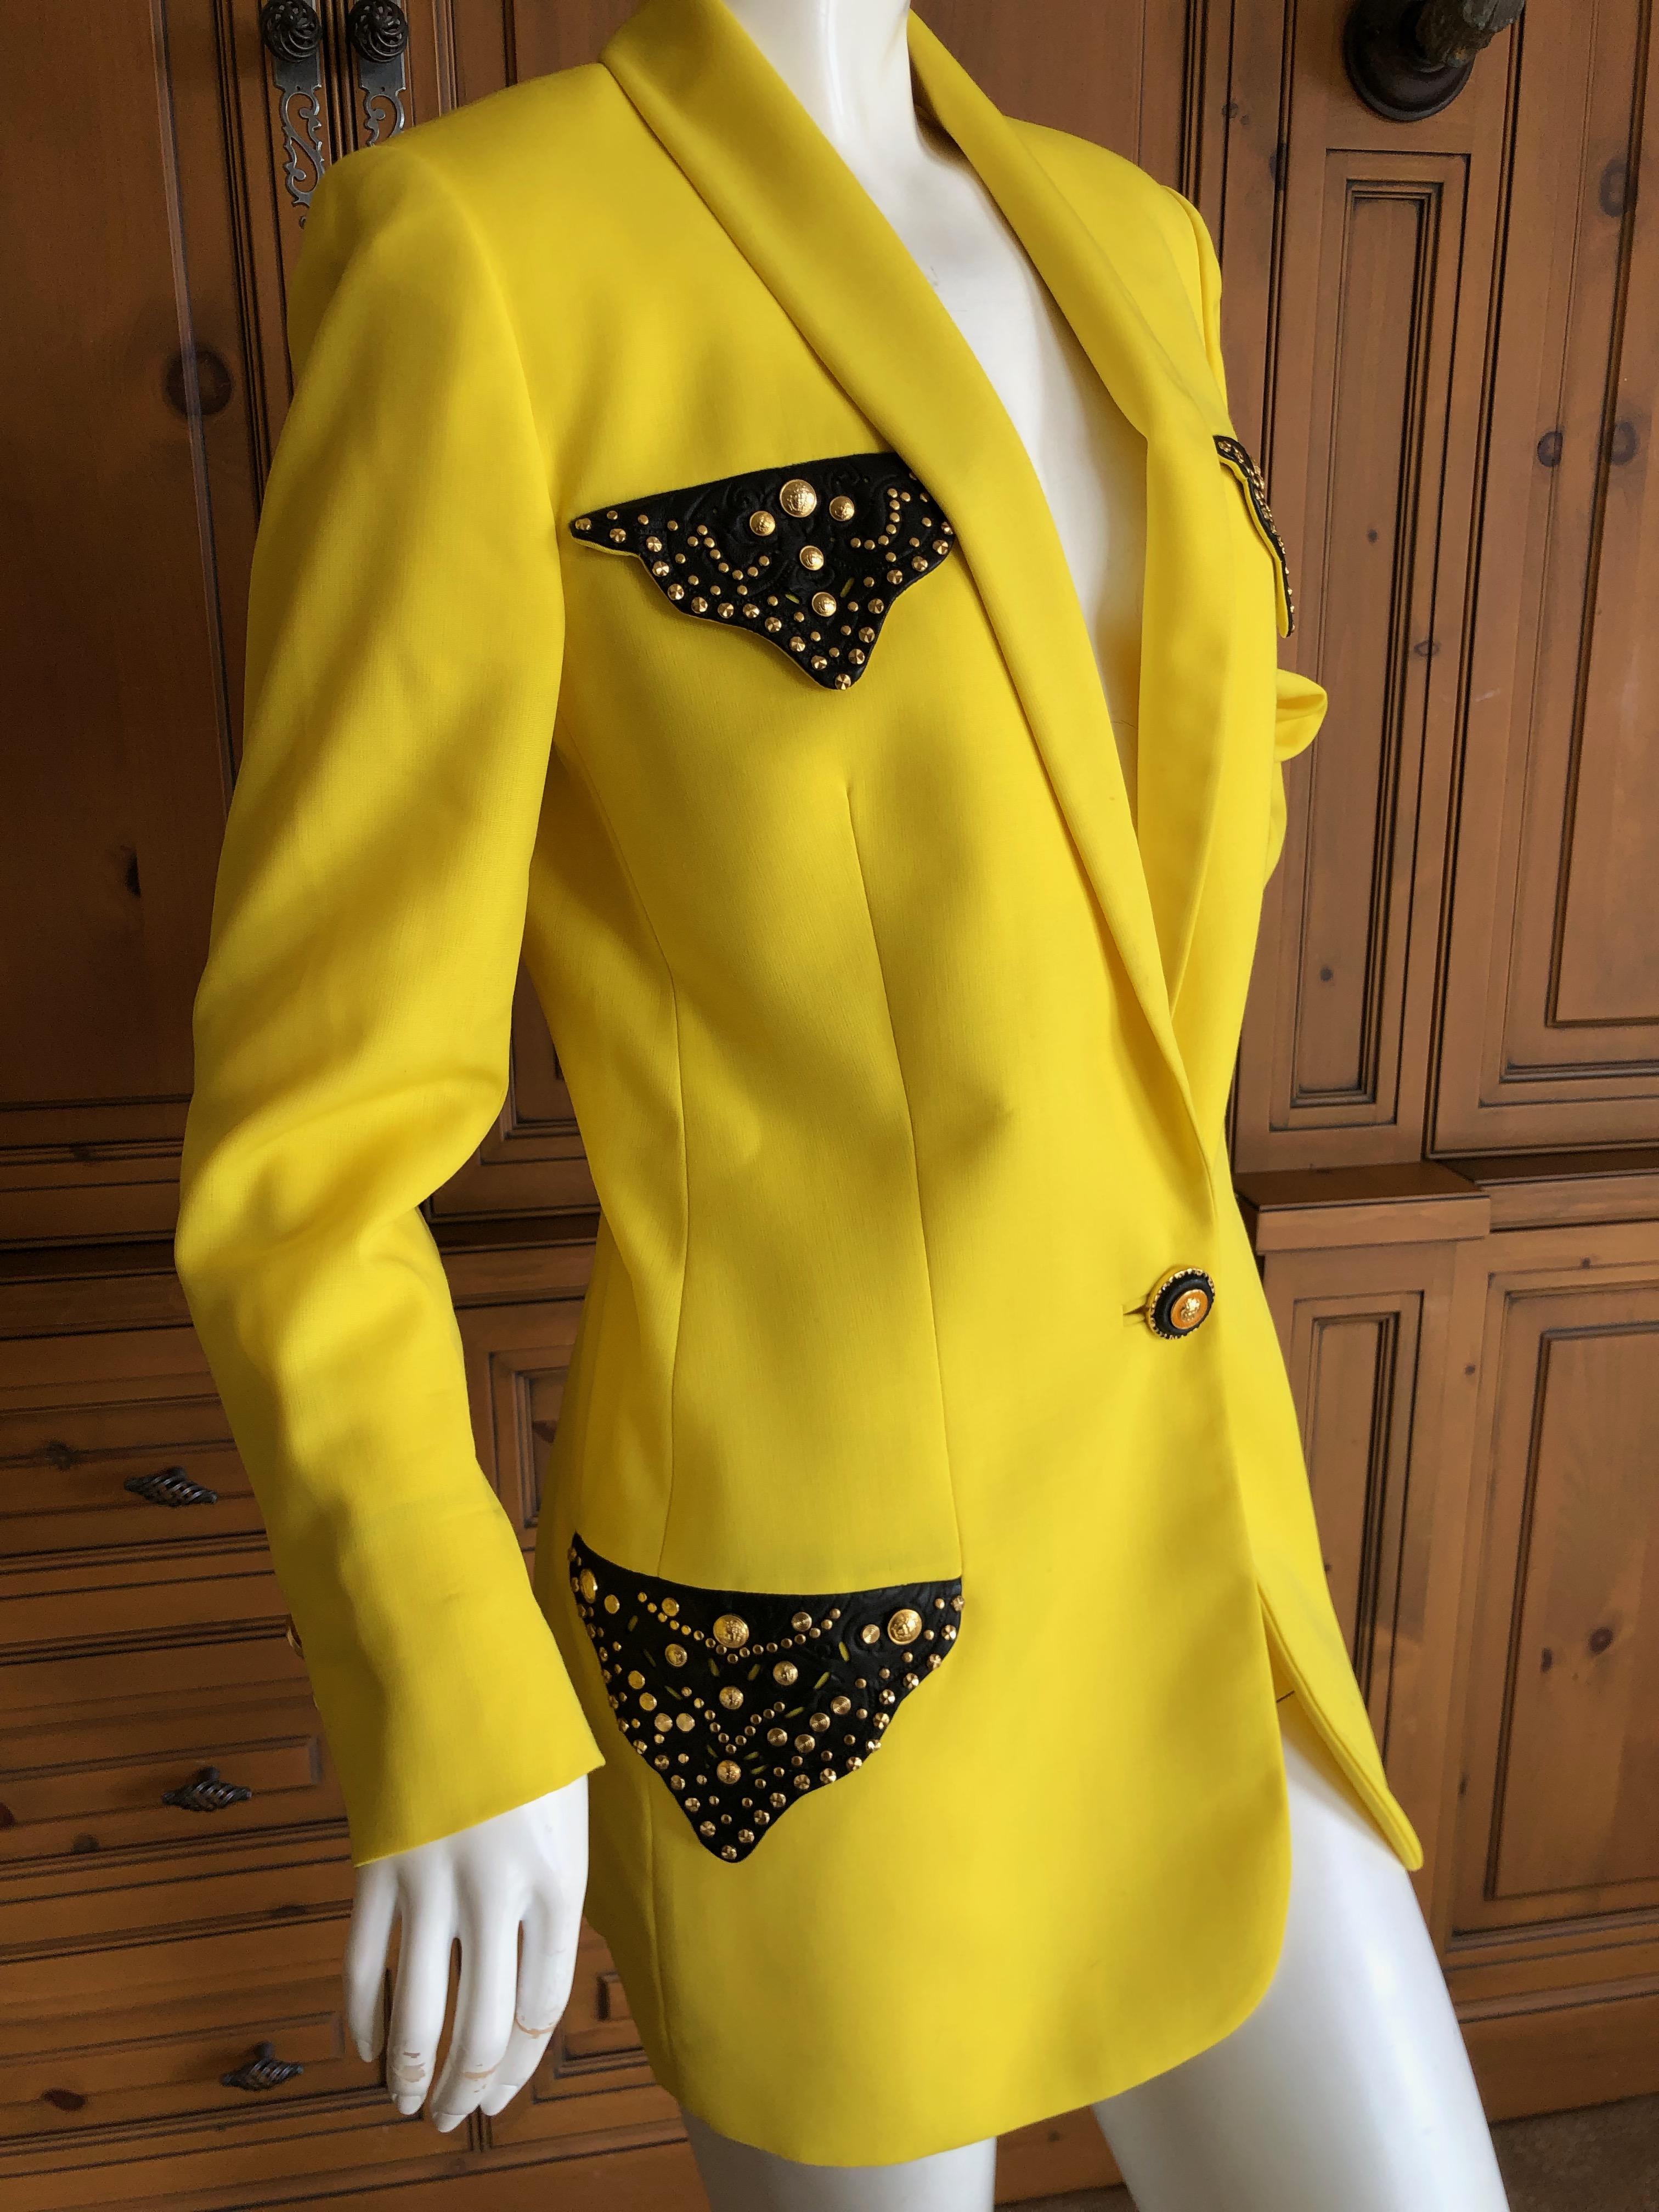 Gianni Versace Iconic Fall 1992 Screaming Yellow Jacket with Leather Details In Excellent Condition For Sale In Cloverdale, CA